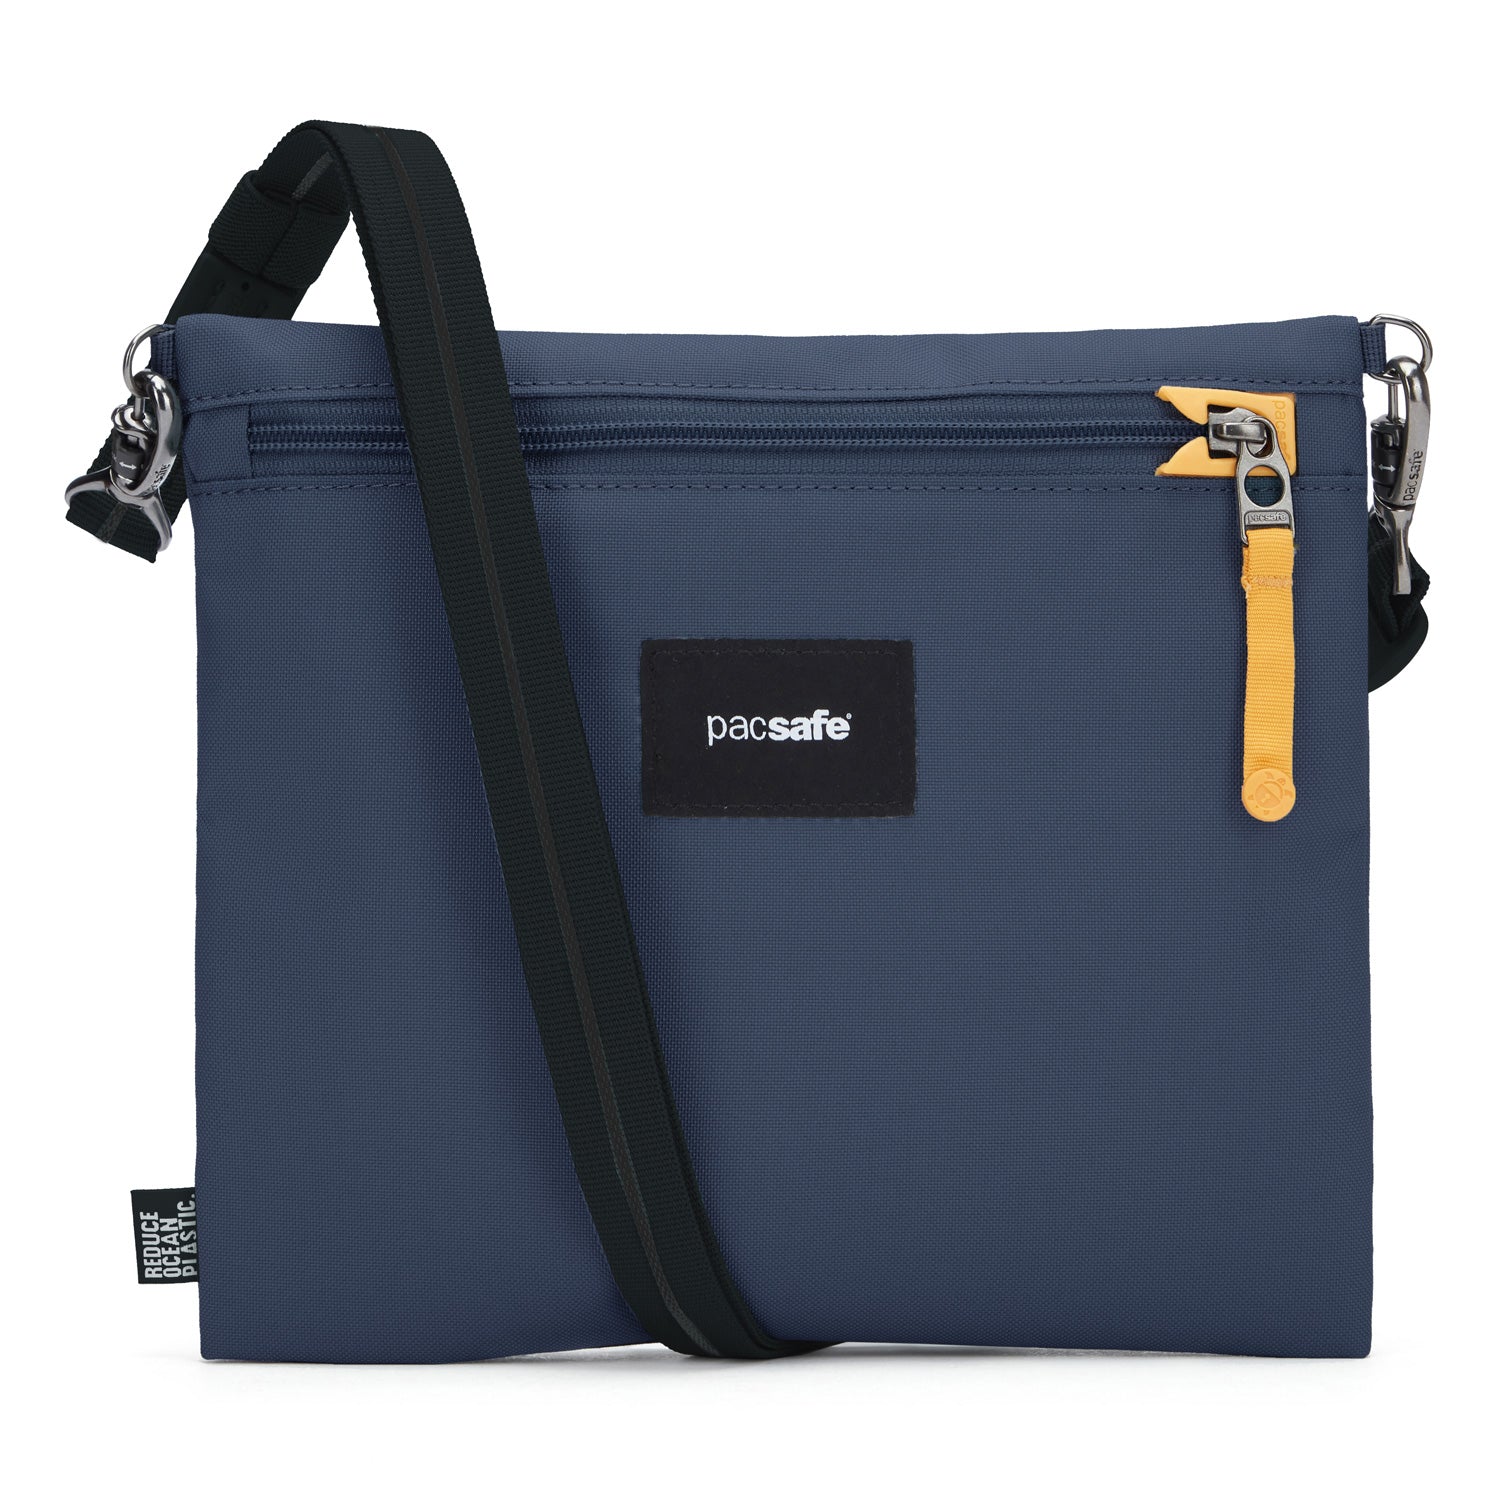 Aspinal of London Large London Pebble Leather Tote Bag, Navy at John Lewis  & Partners